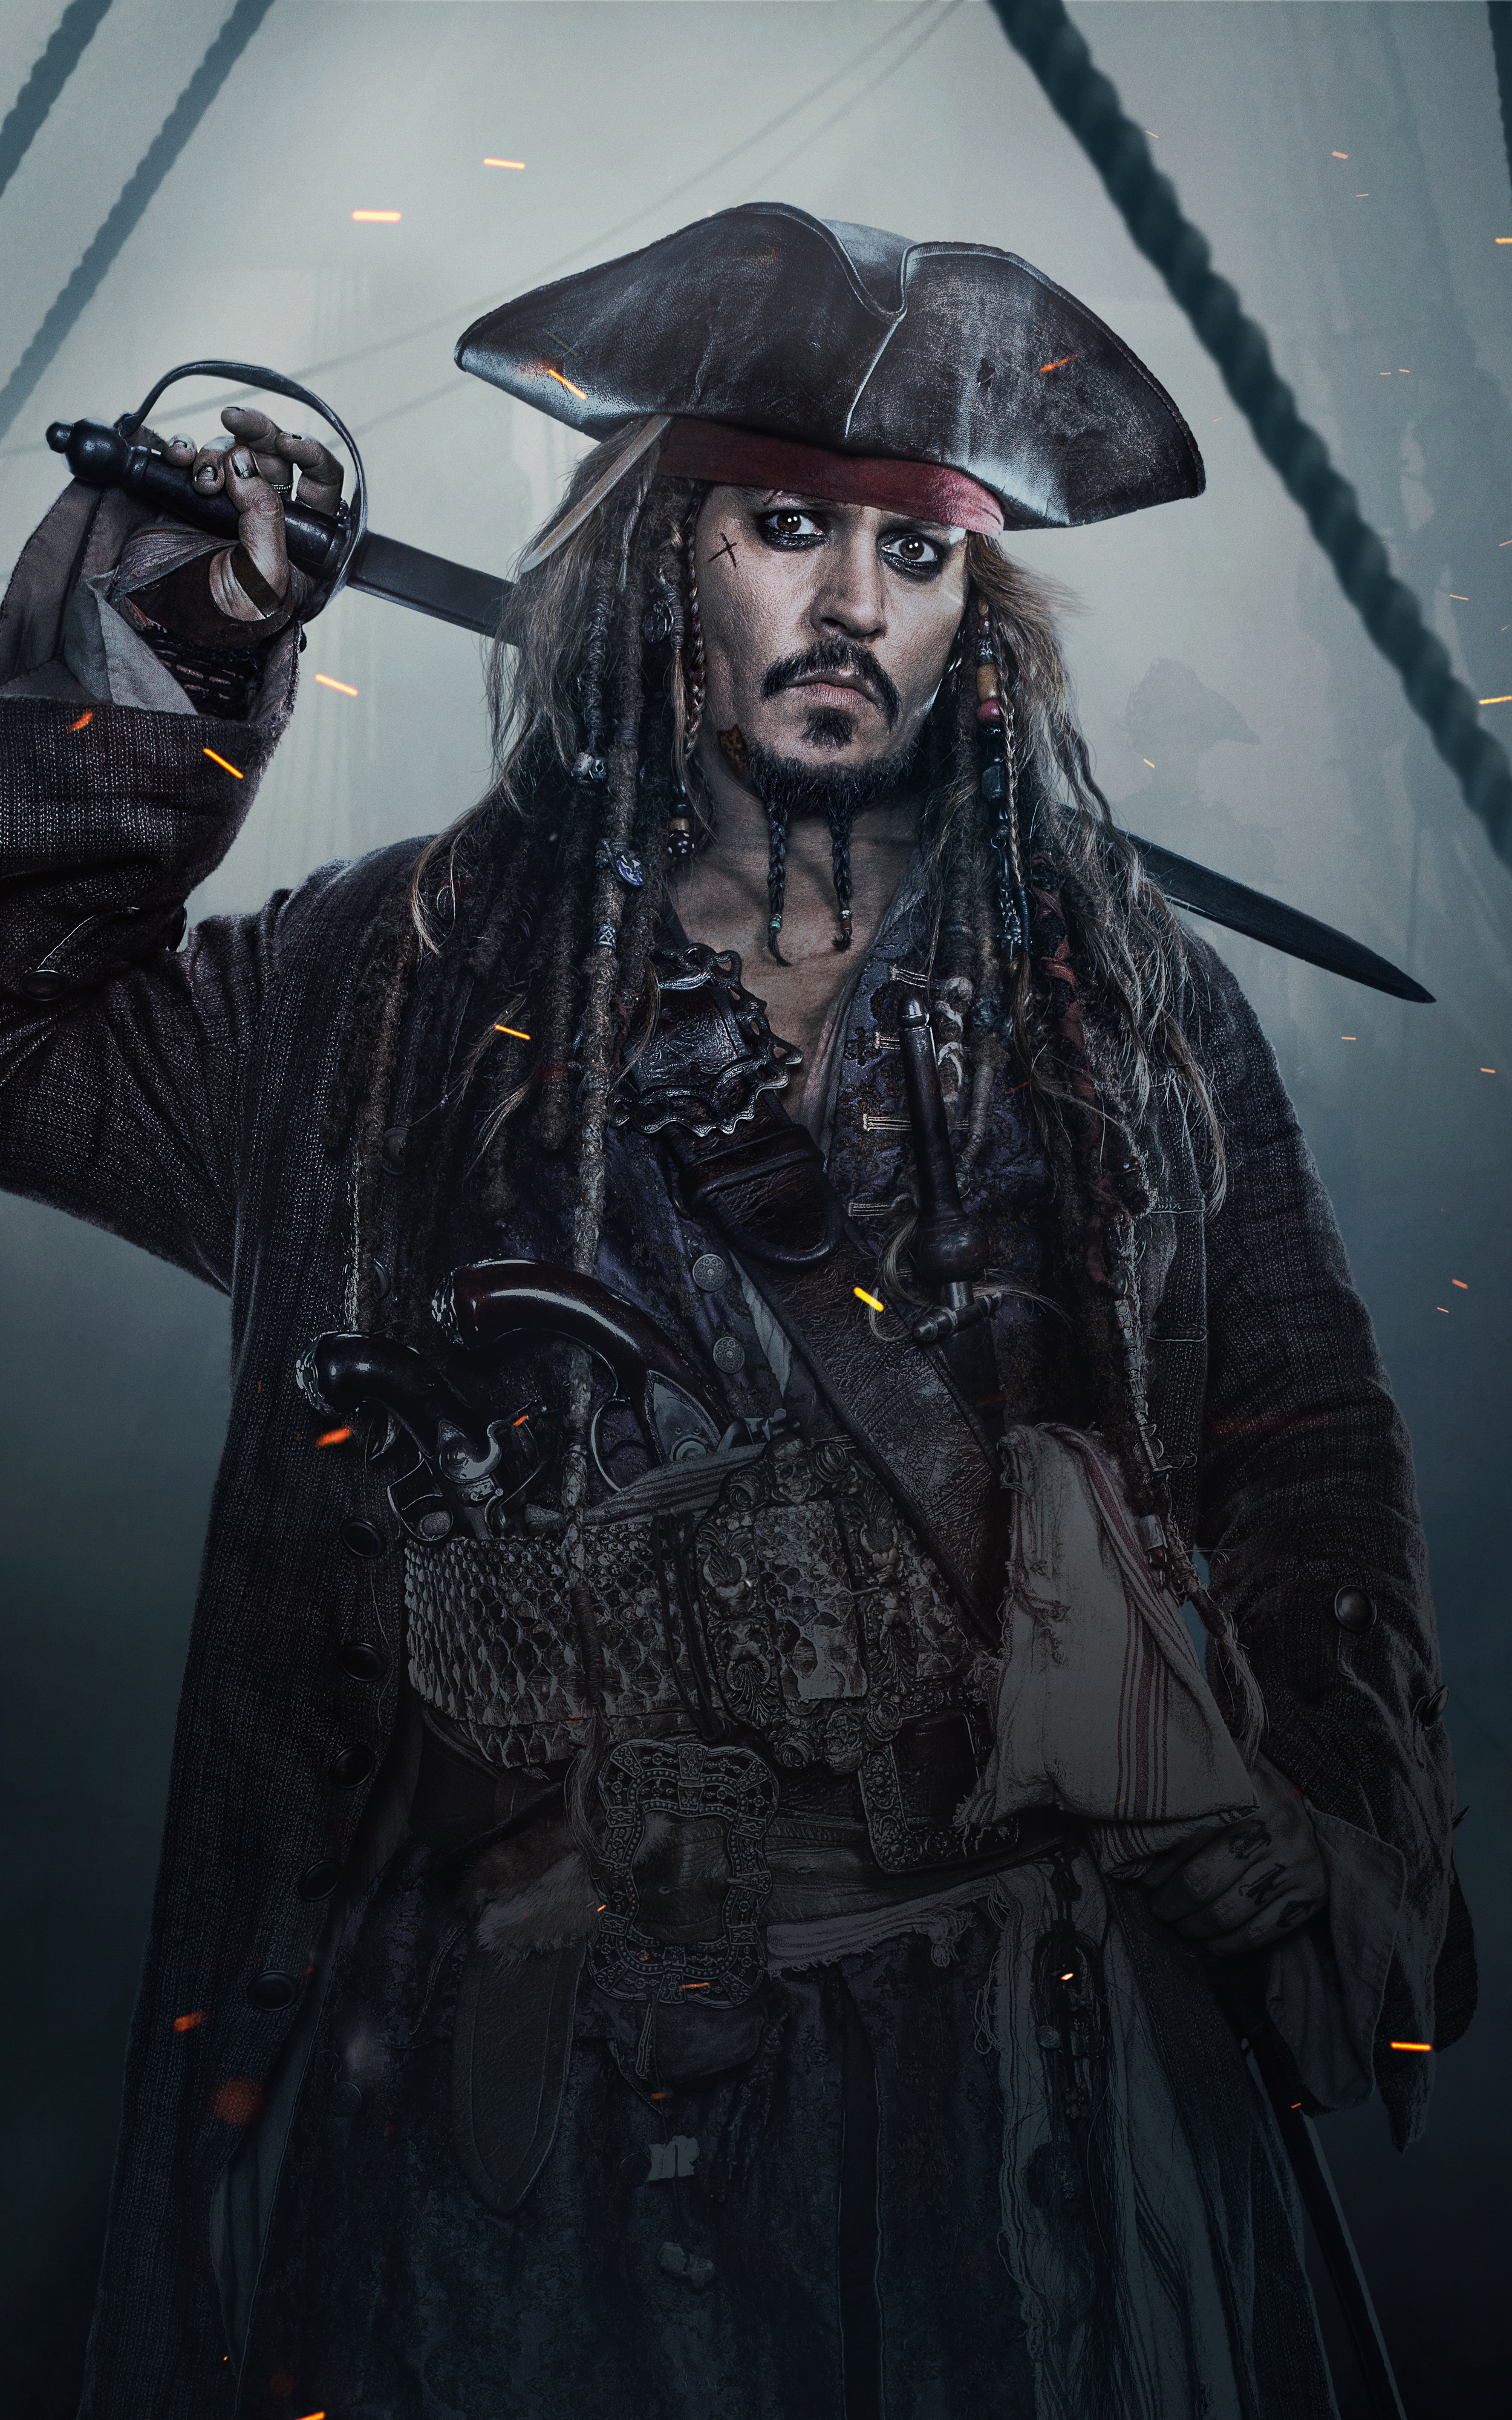 Incredible Compilation of Over 999 Jack Sparrow Images in Stunning 4K Quality